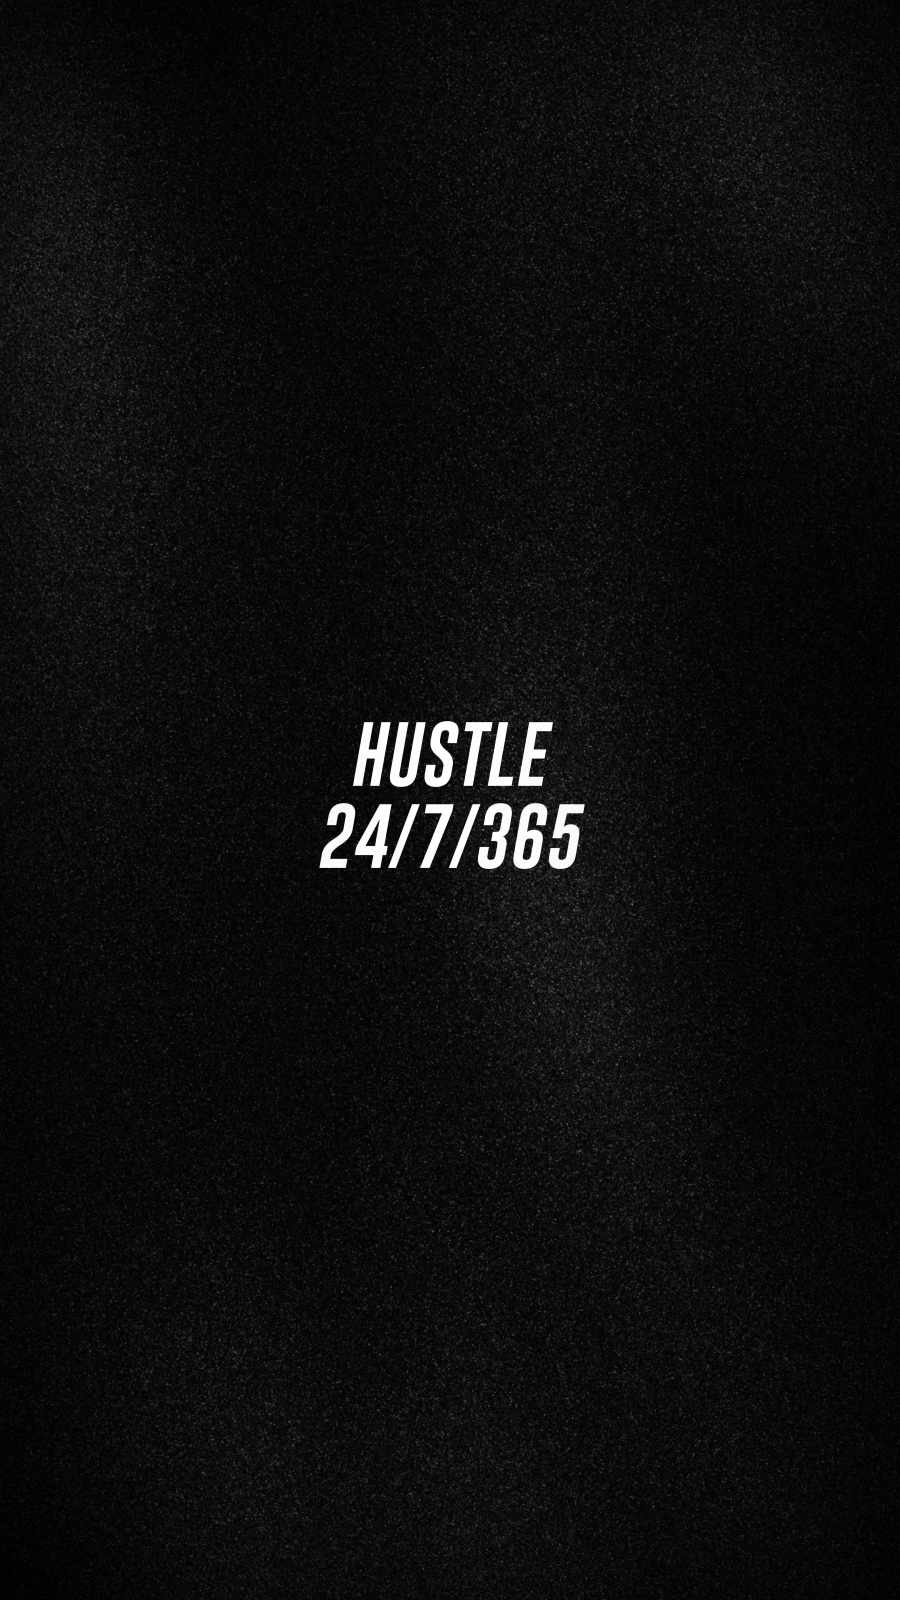 Hustle Every Day IPhone Wallpaper - IPhone Wallpapers : iPhone Wallpapers